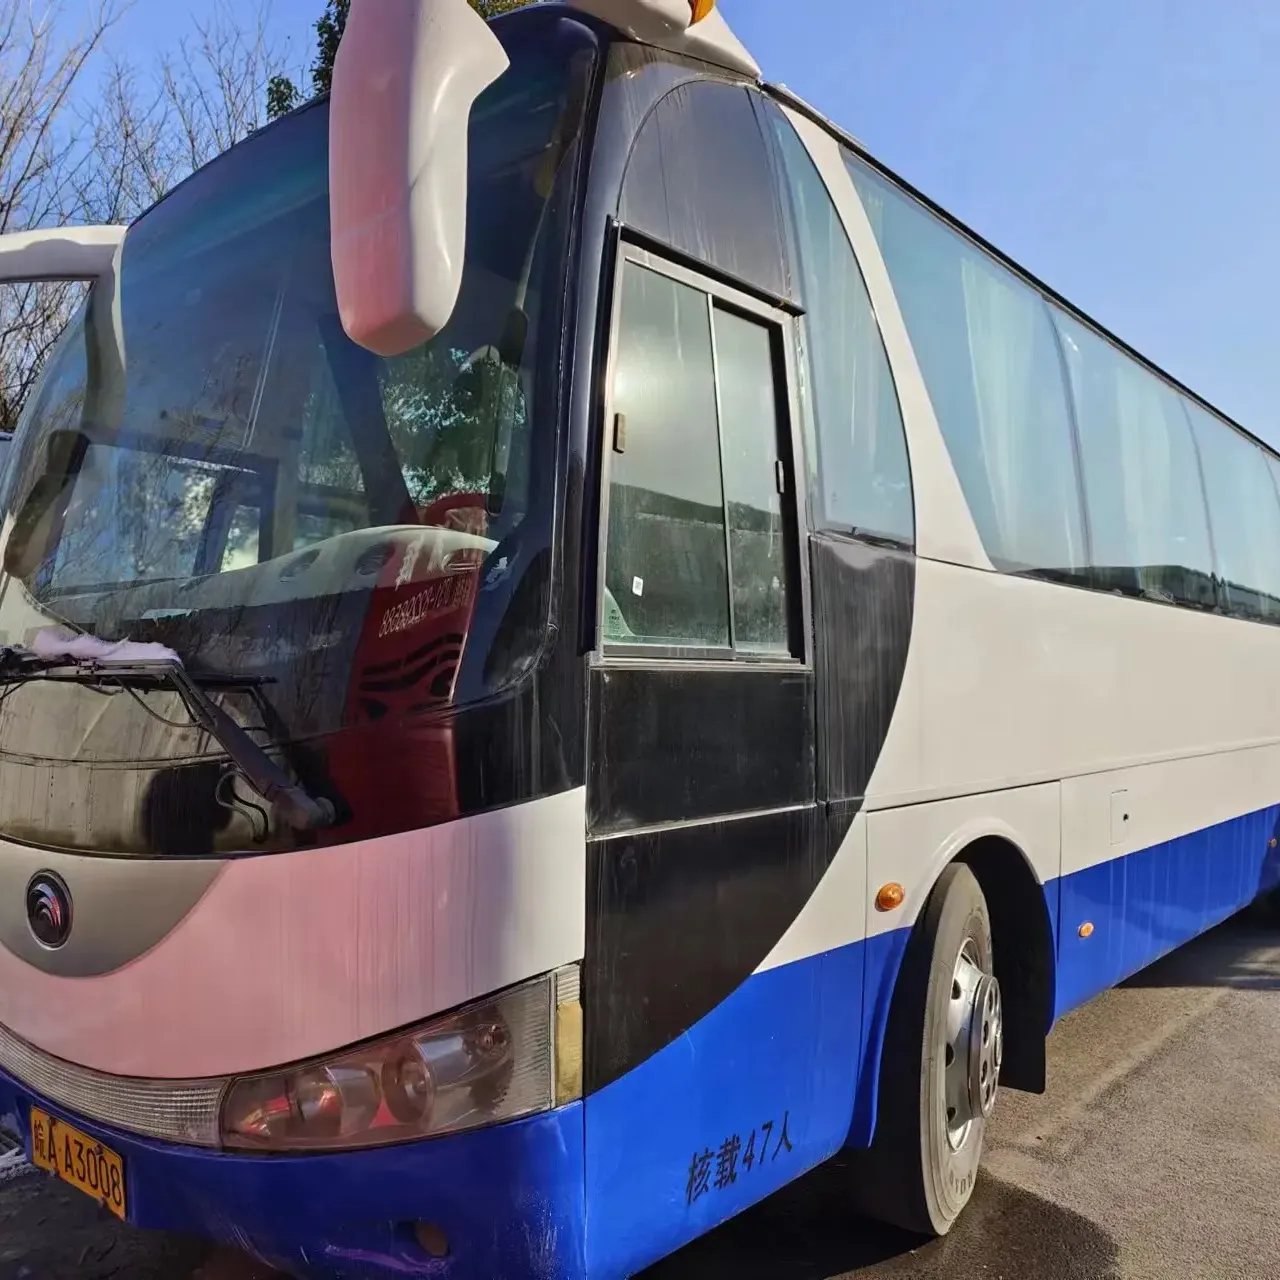 Used Yutong Bus 47 Seats Diesel Bus for Sale Powerful Engine With White and Blue Color In Good Condition